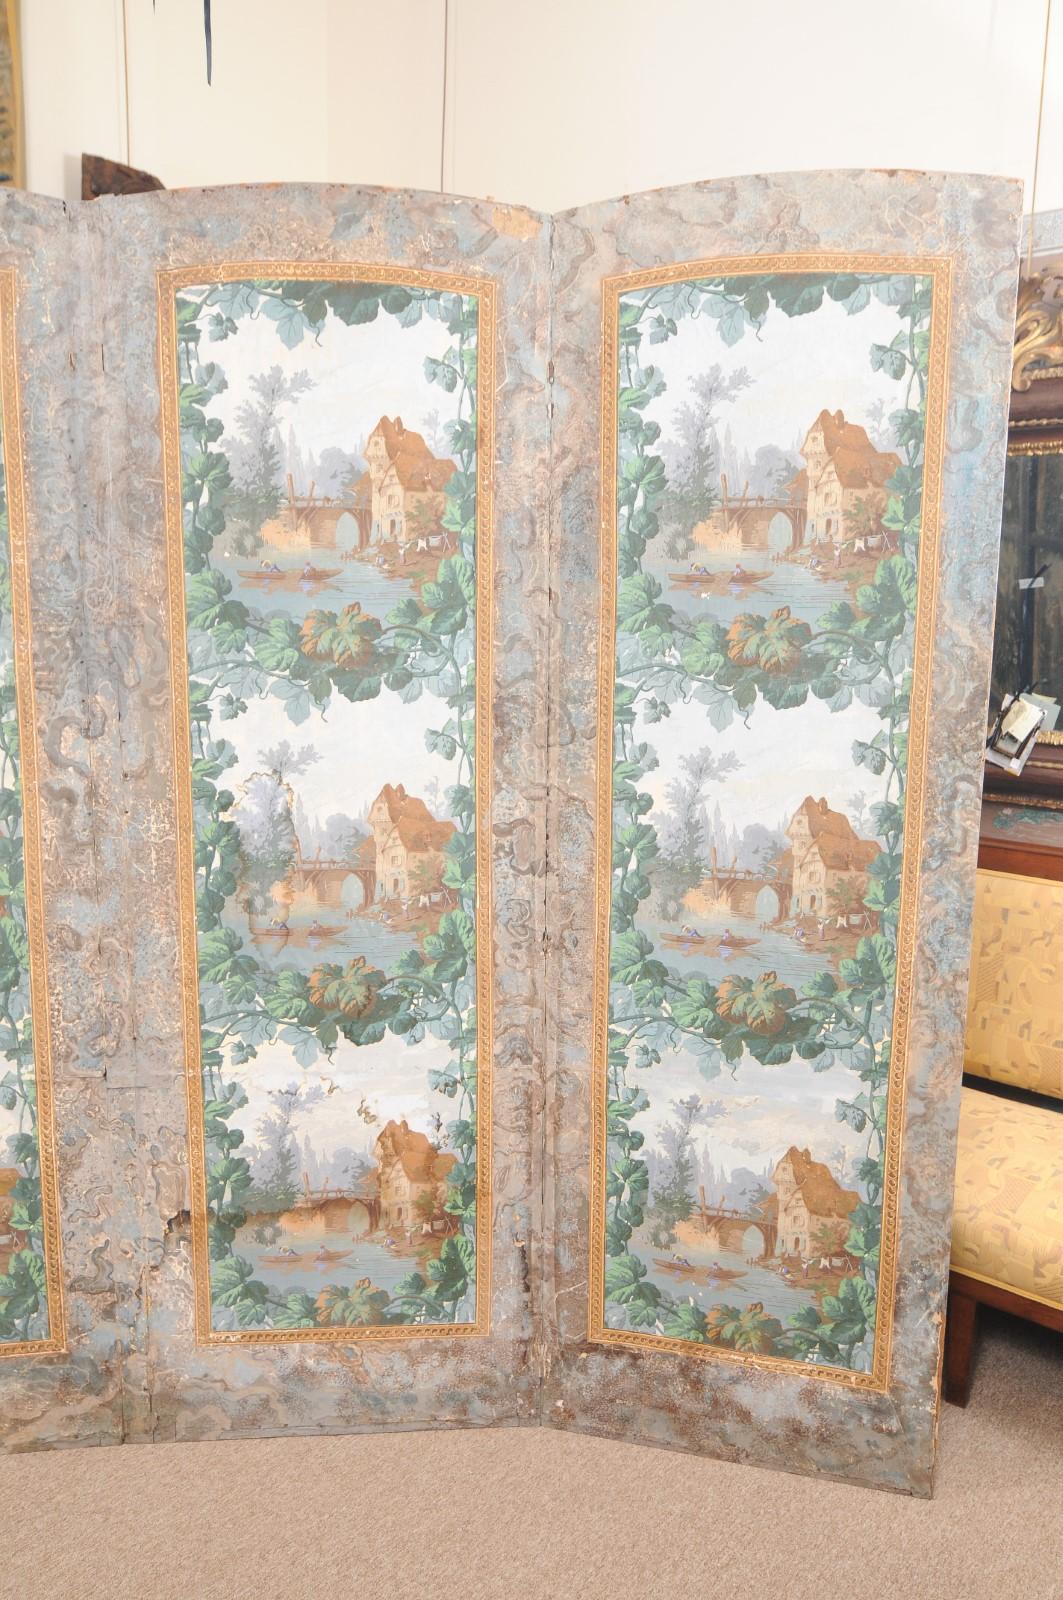 19th century French 4-Panel Wallpaper mounted on Canvas Folding Screen featuring Canal Scene.